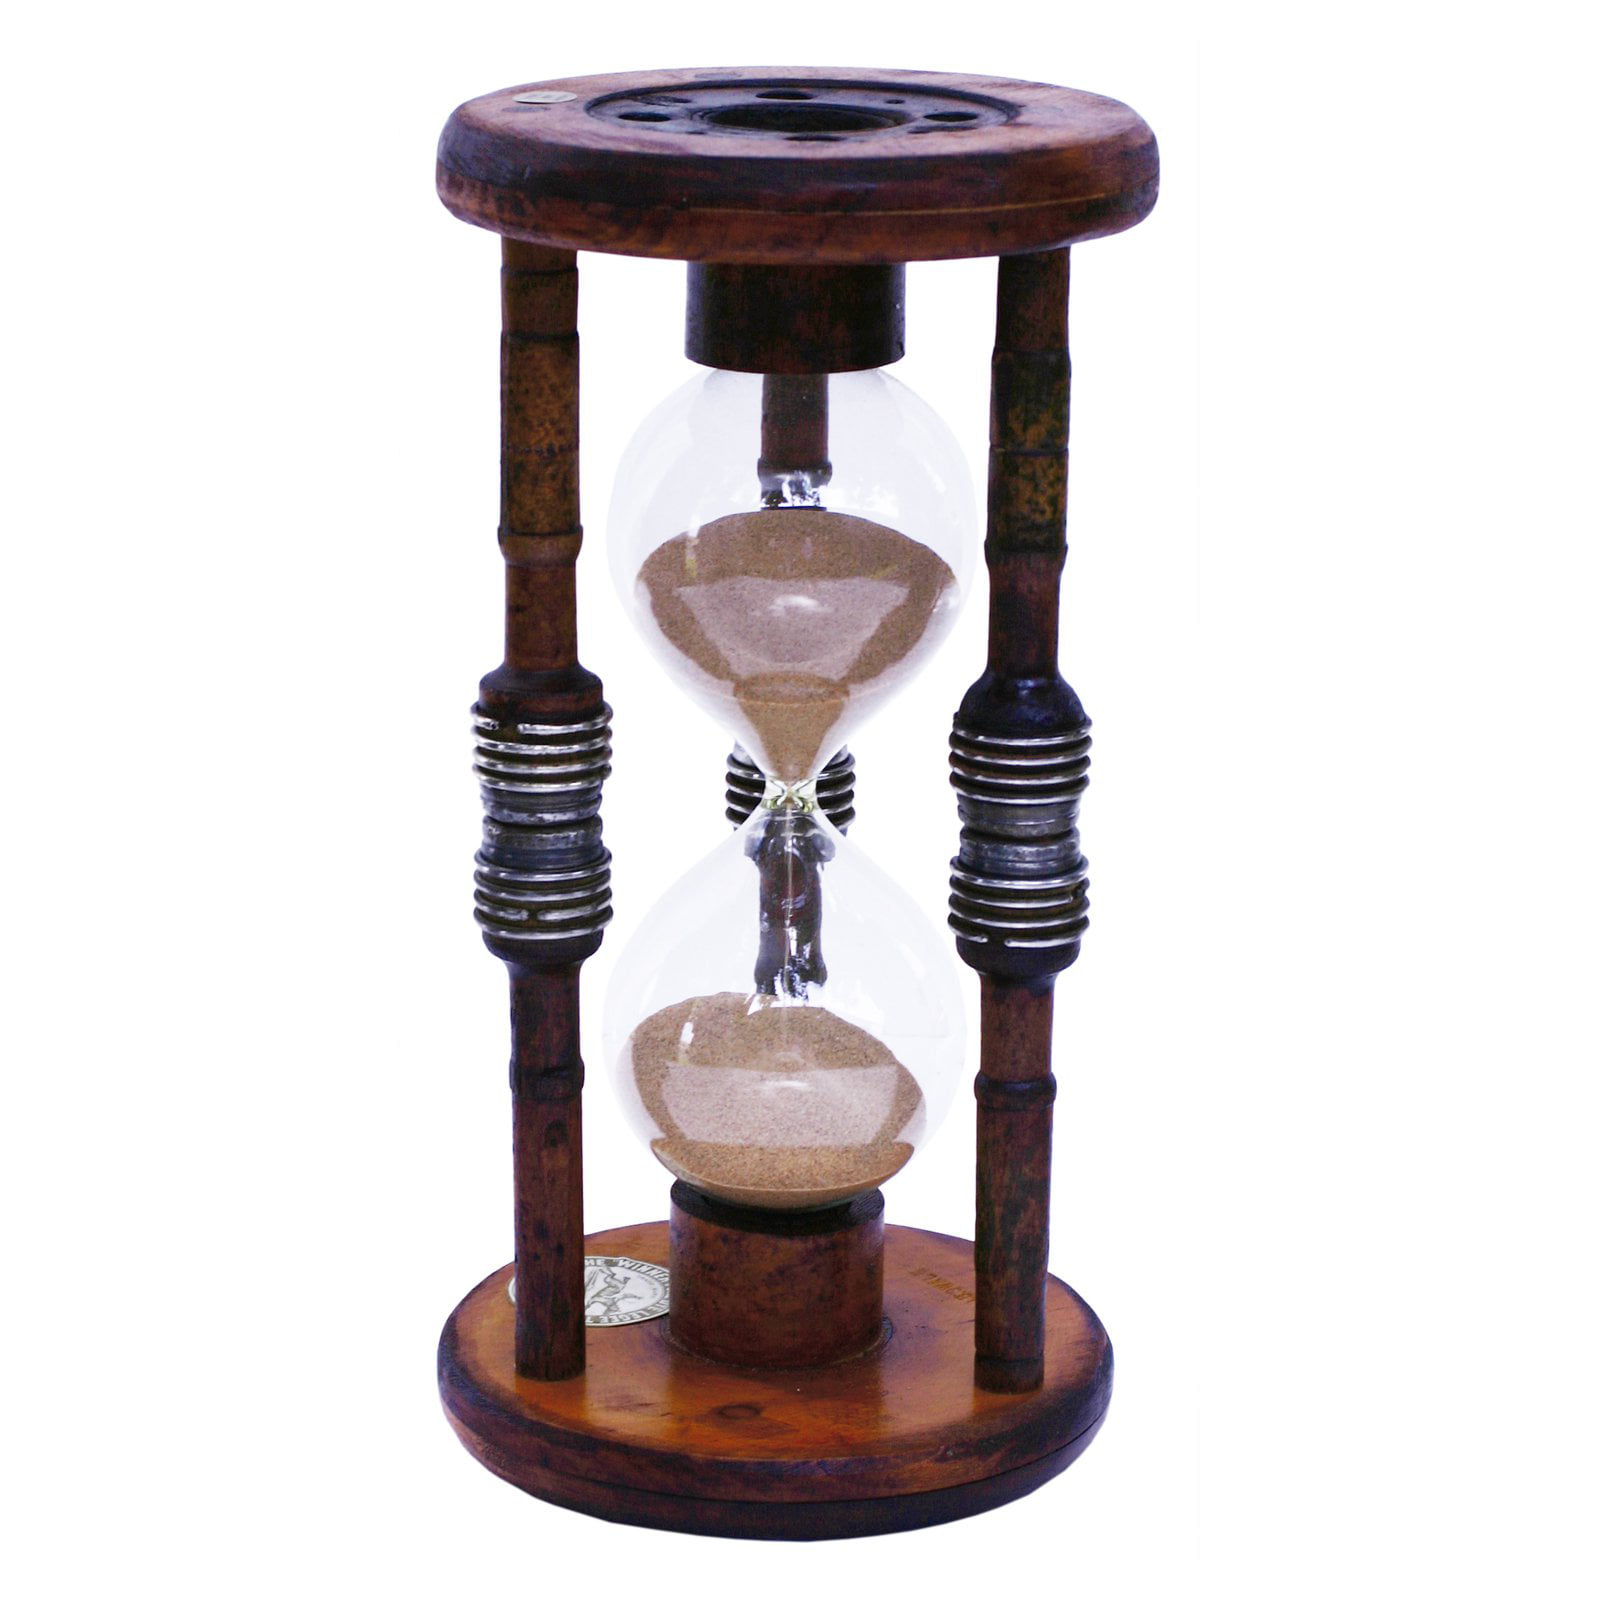 30 Minute Bobbin Hourglass with Black or White Sand